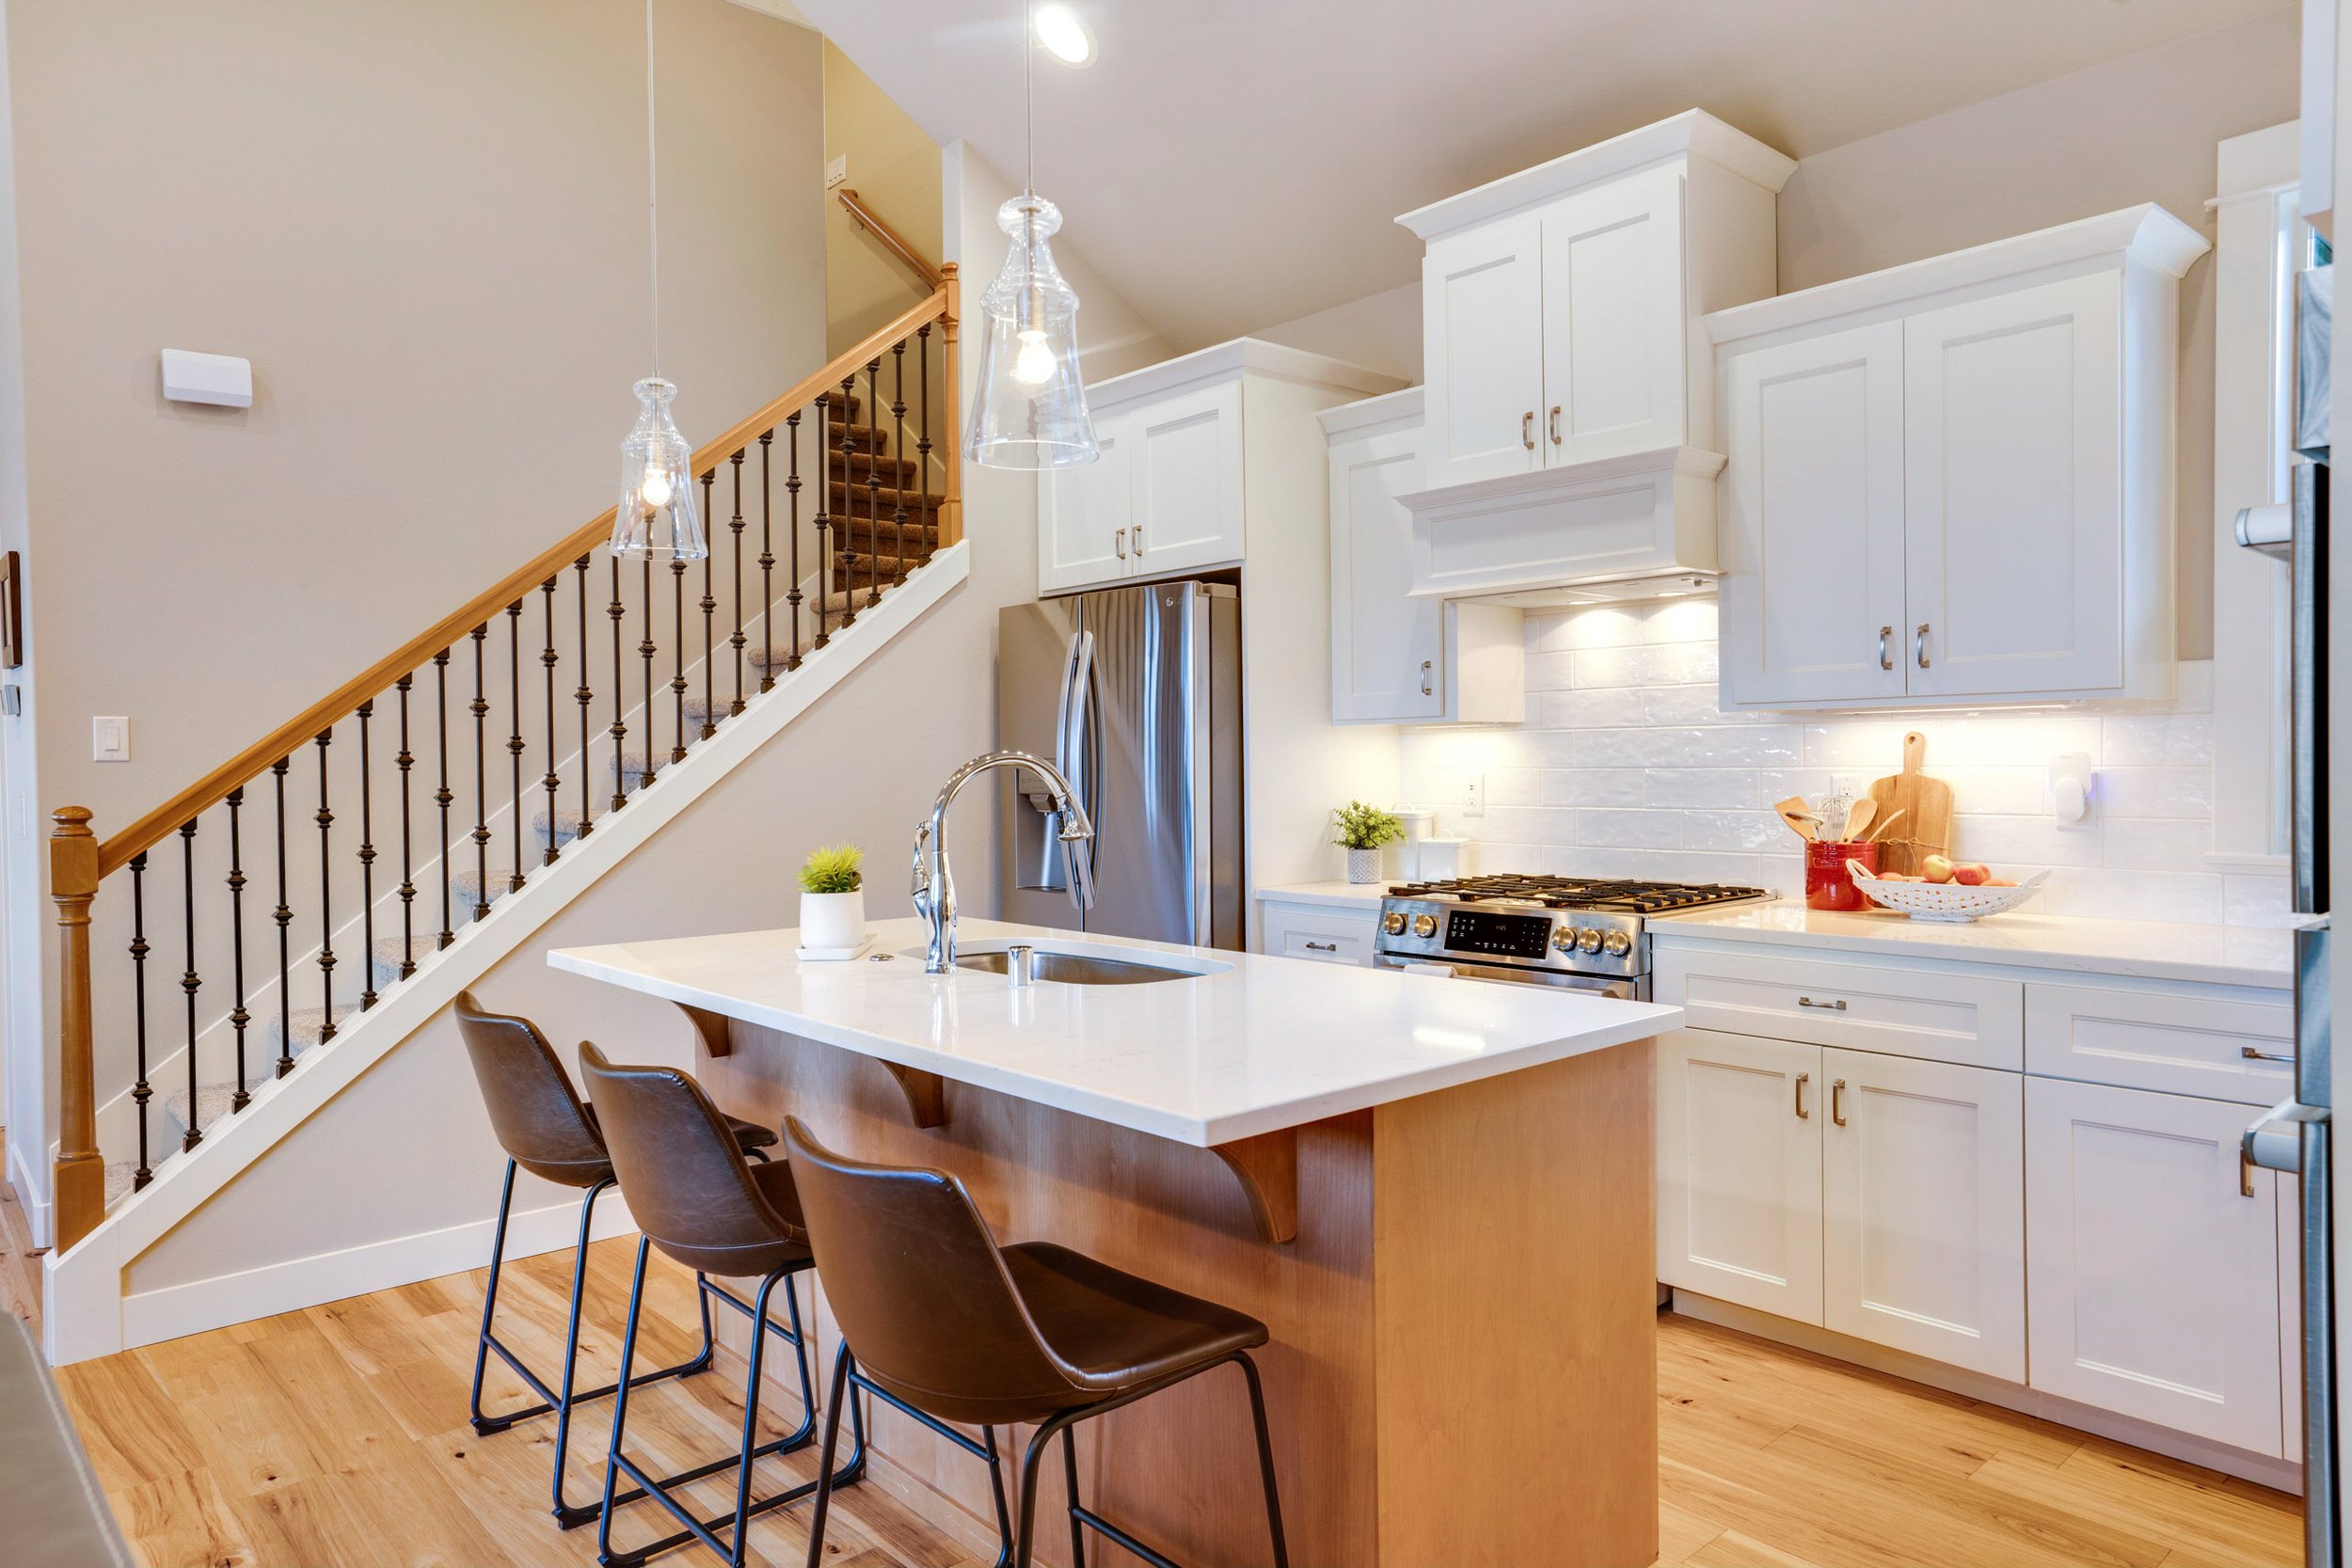 Kitchen Island and Open Staircase Fircrest Condo.jpg